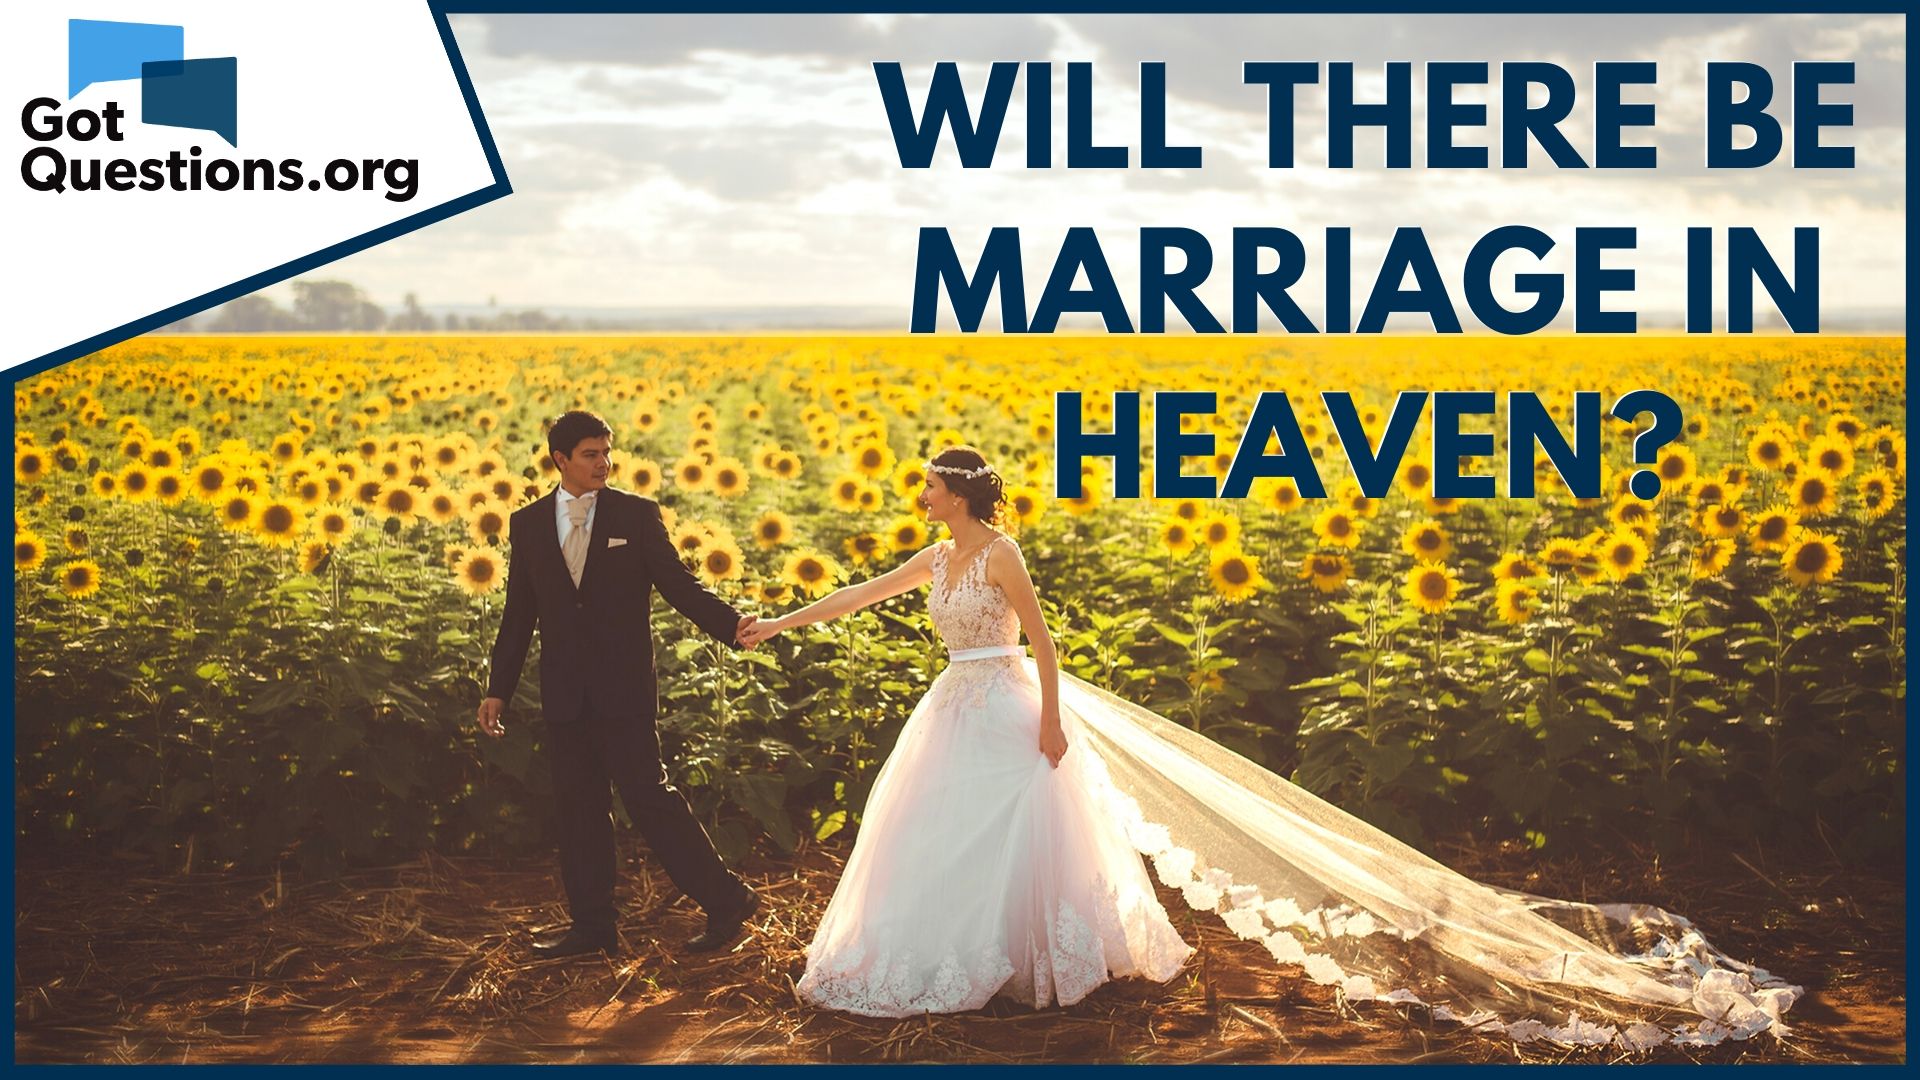 Will there be marriage in heaven? | GotQuestions.org